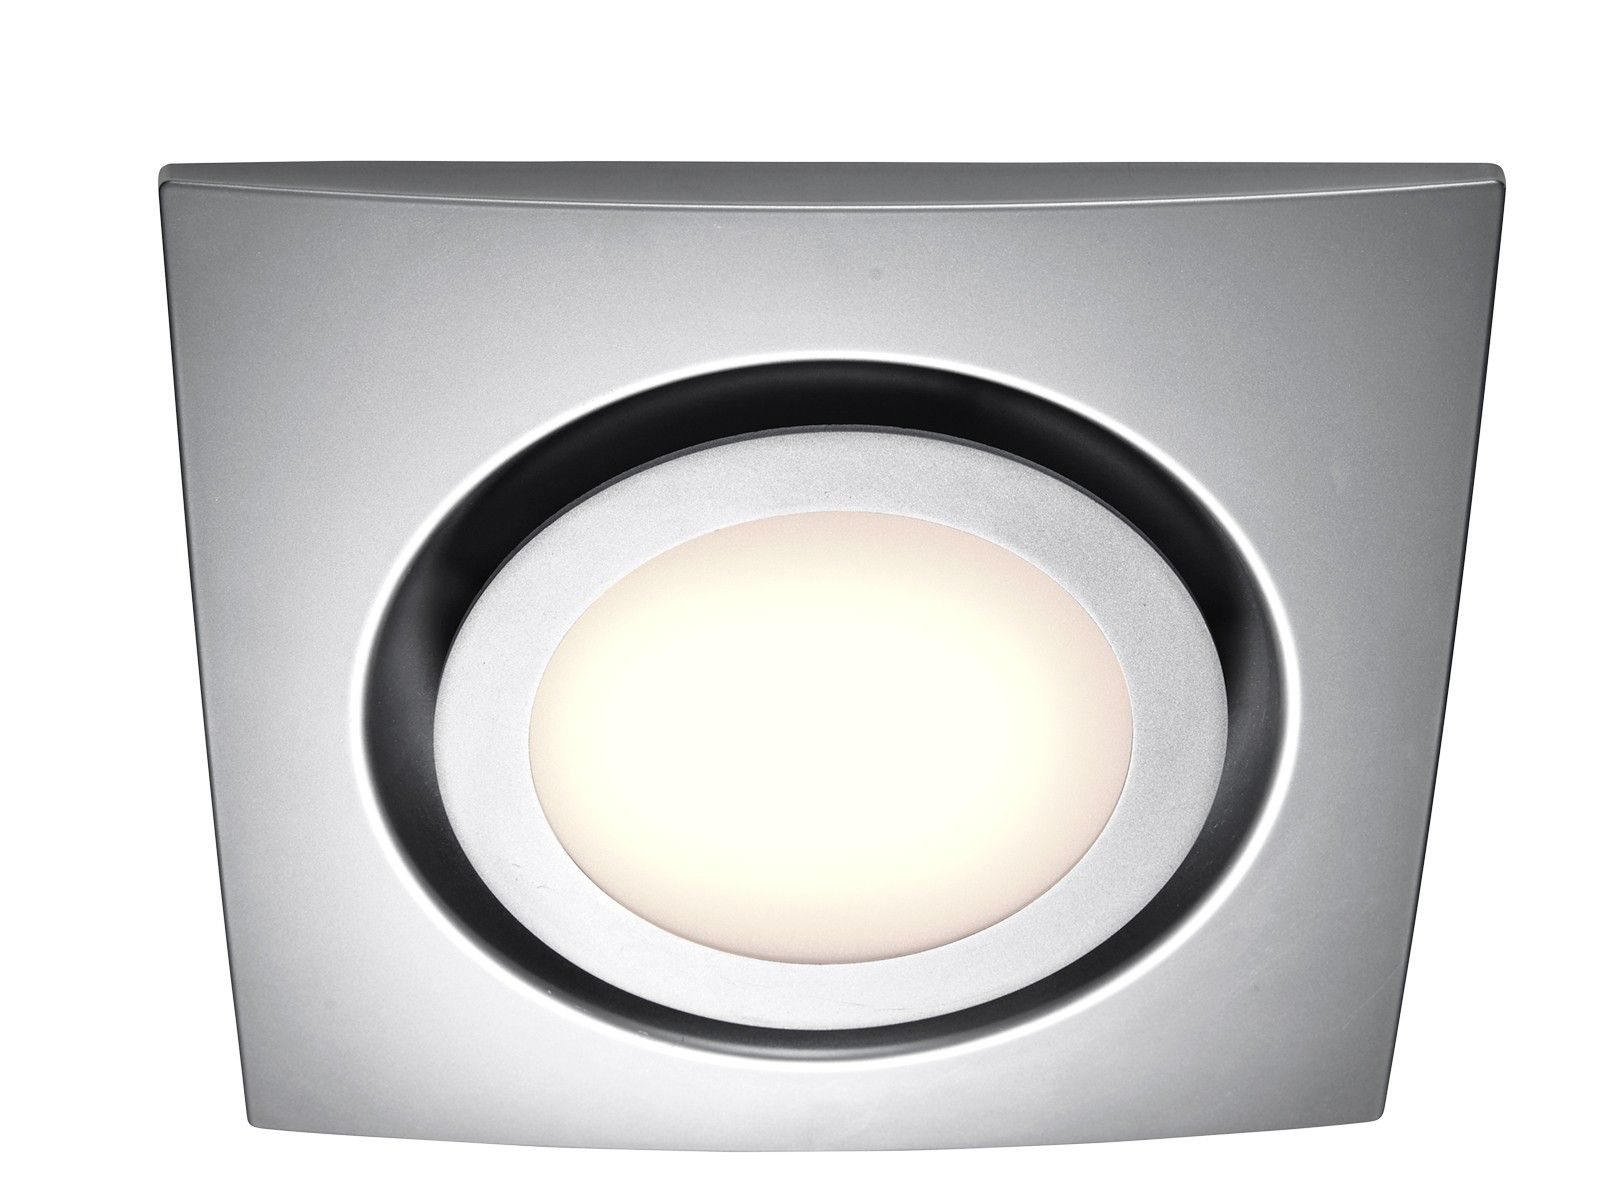 Silver Exhaust Fan With Led Light Bathroom Exhaust Fan pertaining to dimensions 1600 X 1200